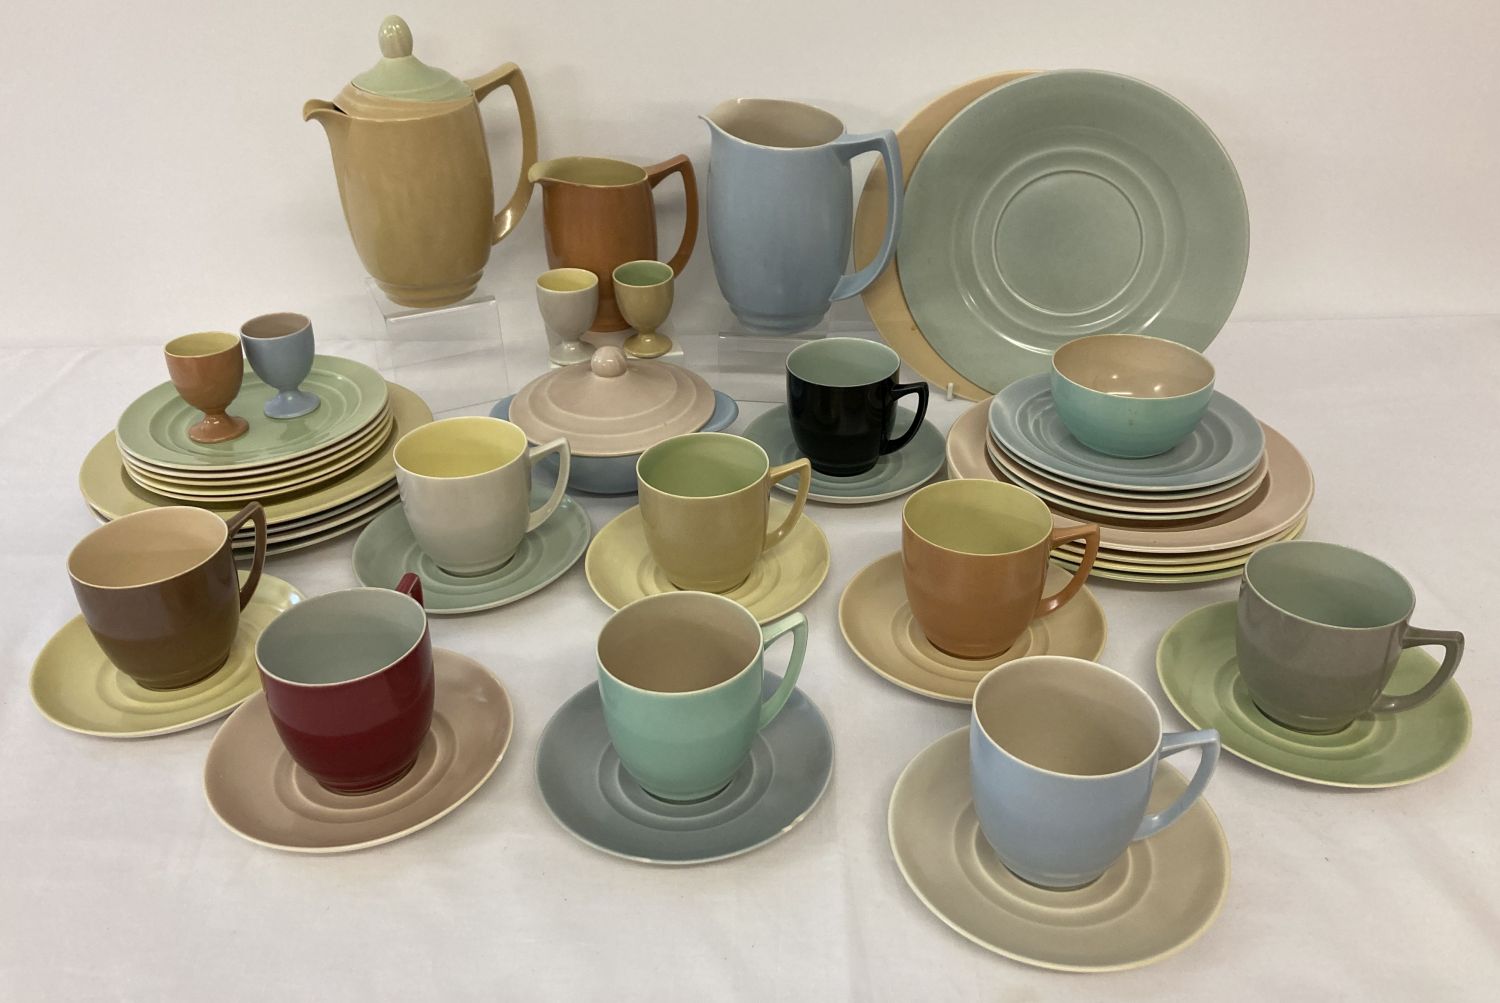 A collection of vintage Branksome Harlequin tea and dinner ware.